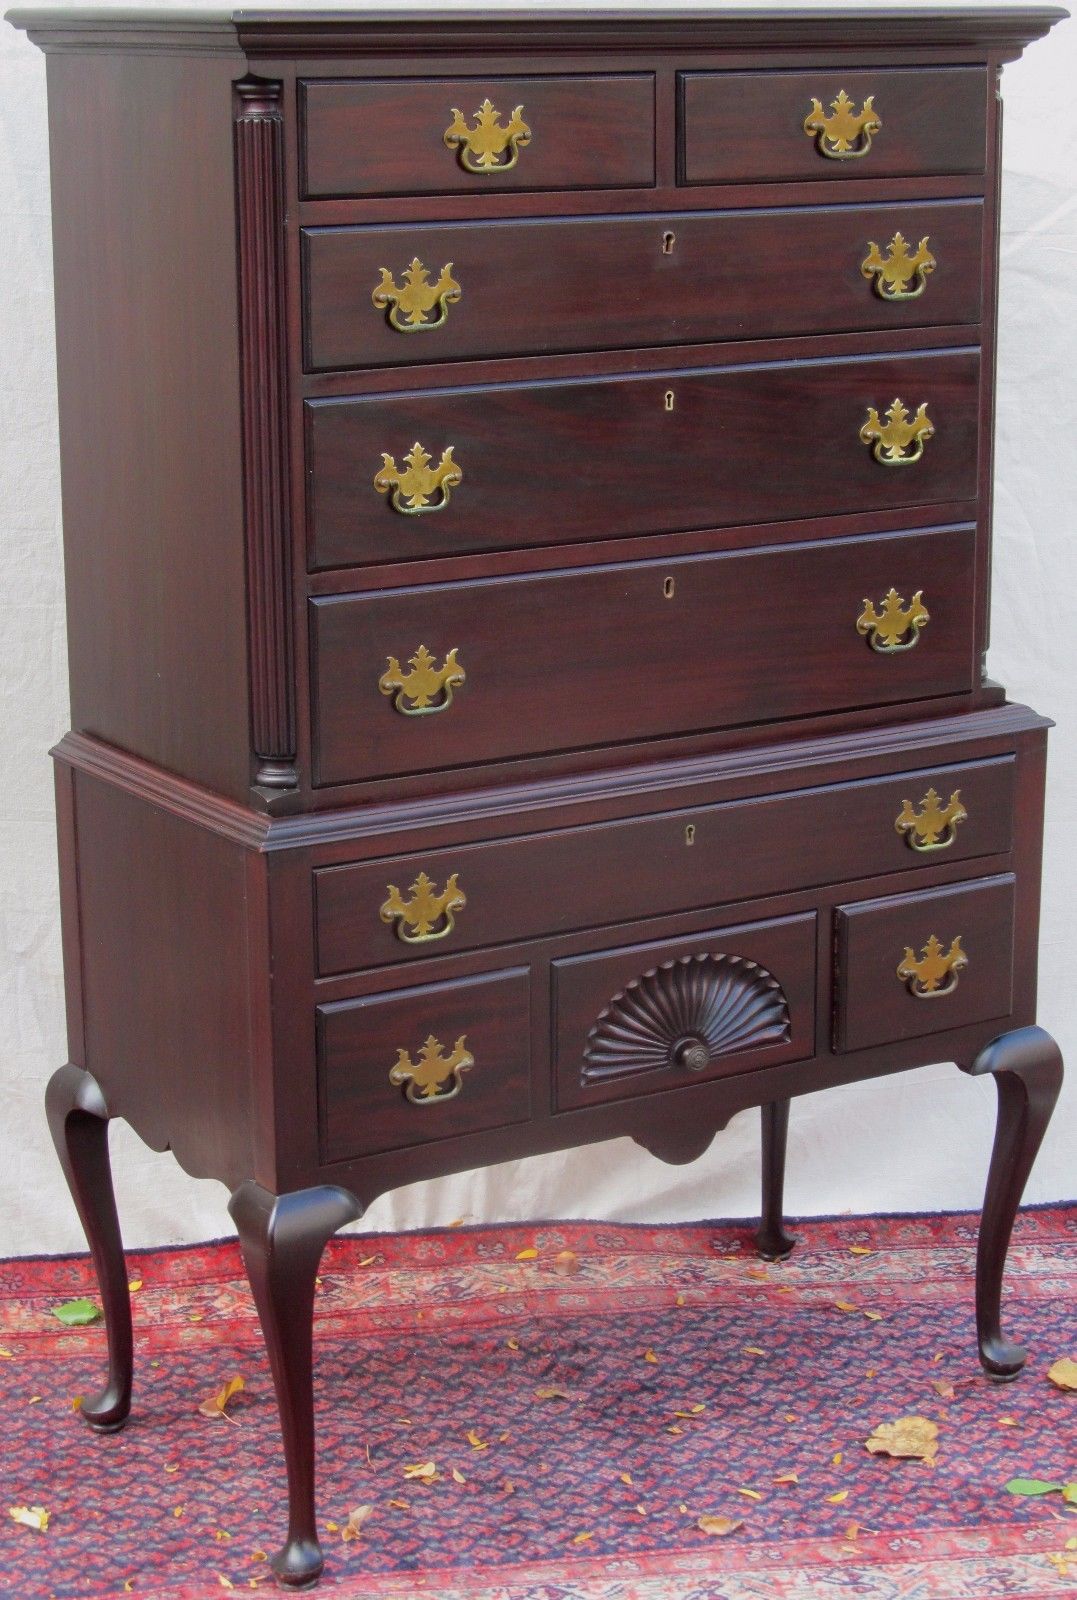 SOLID MAHOGANY CHEST OF CHEST FAN CARVED QUEEN ANNE STYLED HIGHBOY